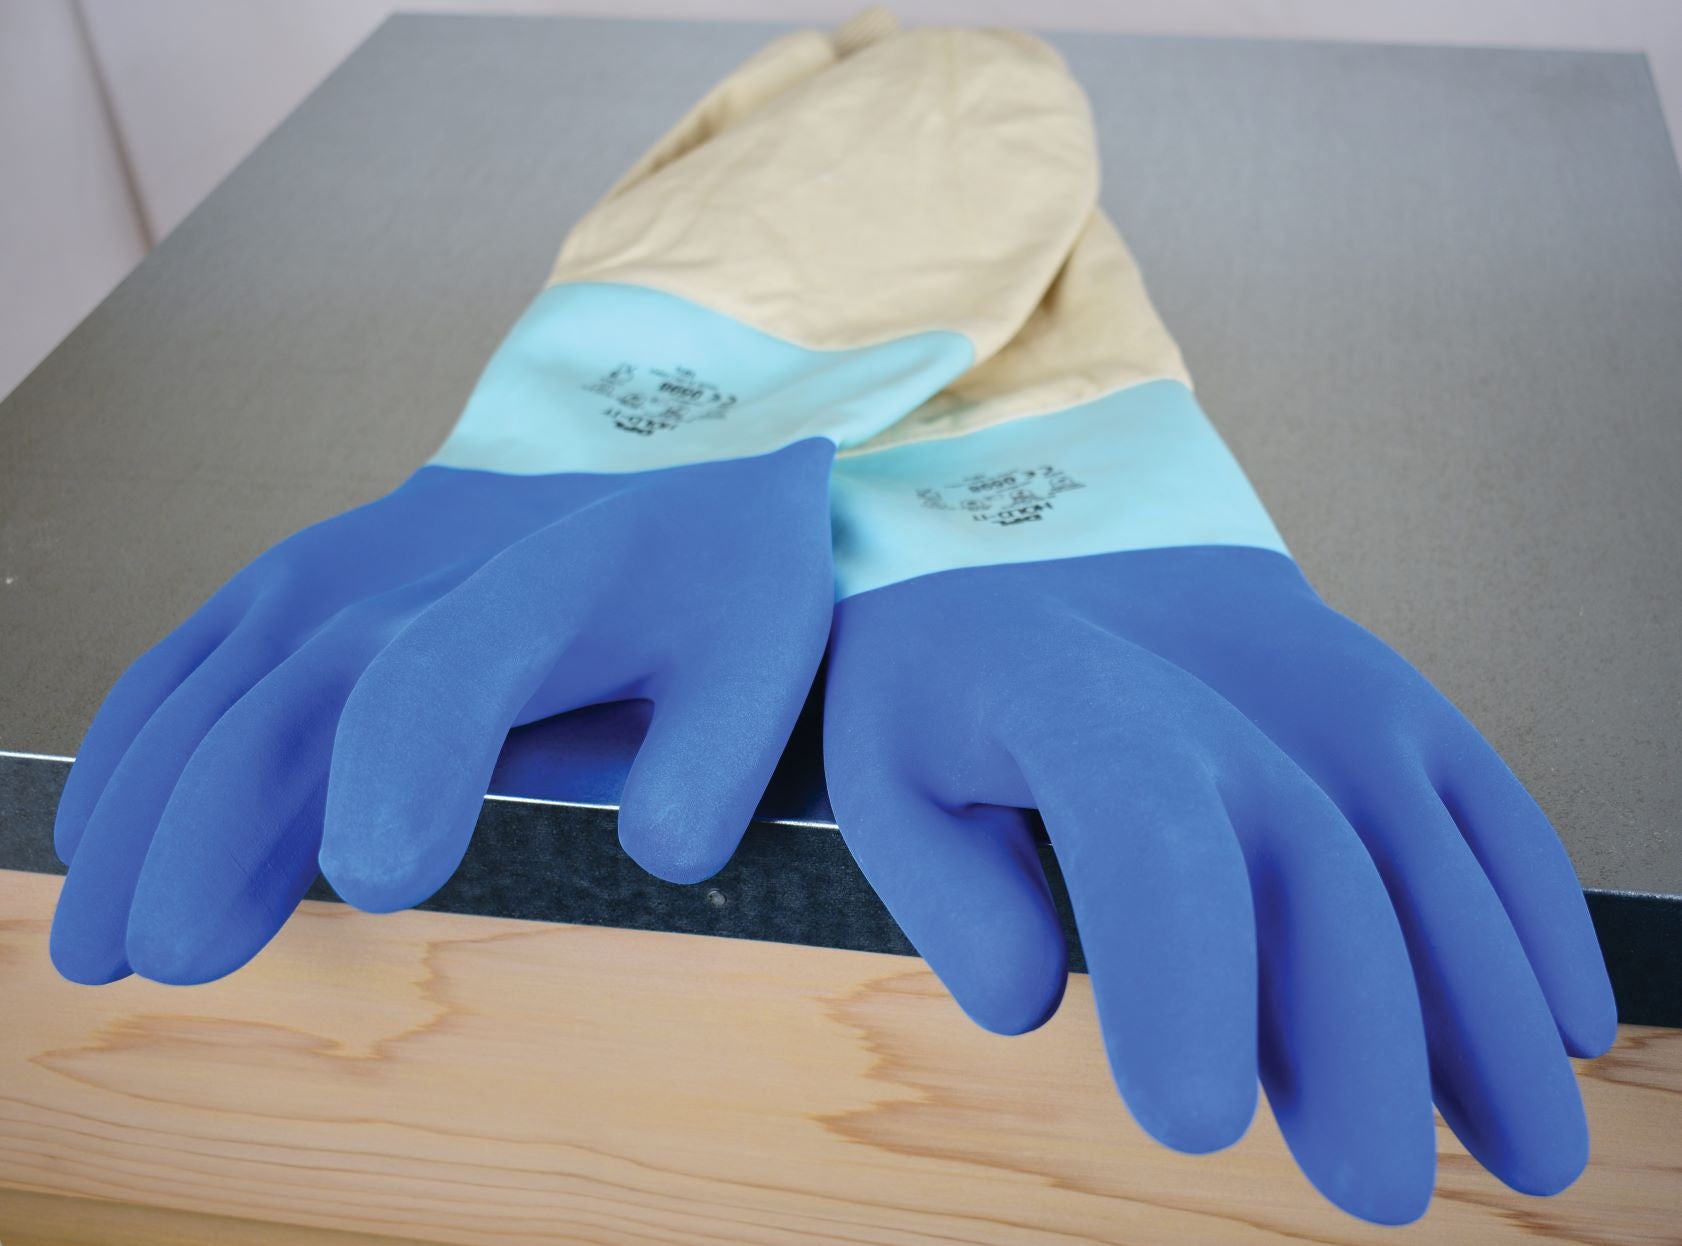 Latex Gloves with Gauntlet